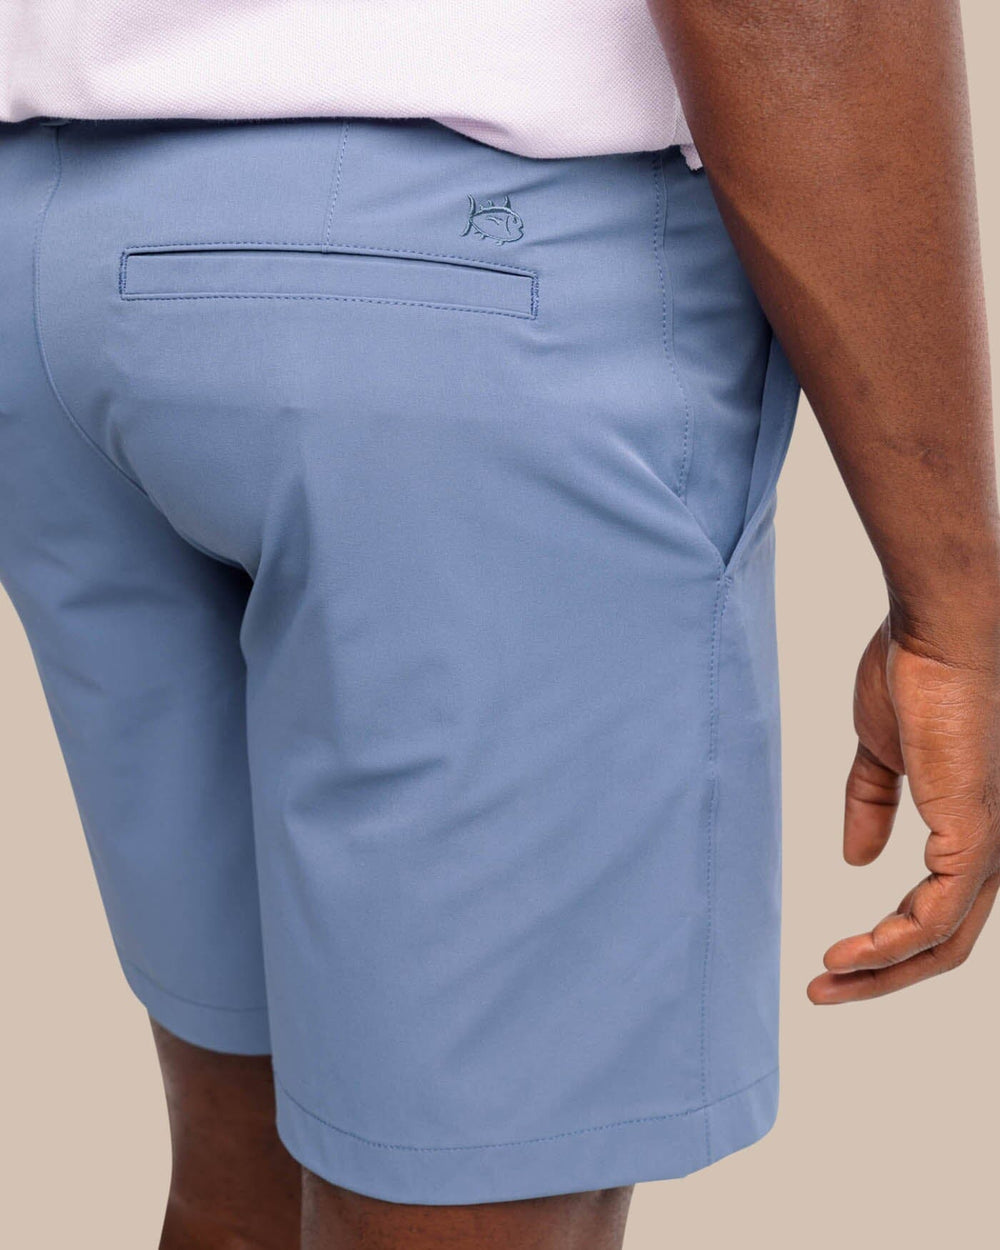 The detail view of the Southern Tide brrr die performance short 1 by Southern Tide - Dark Seas